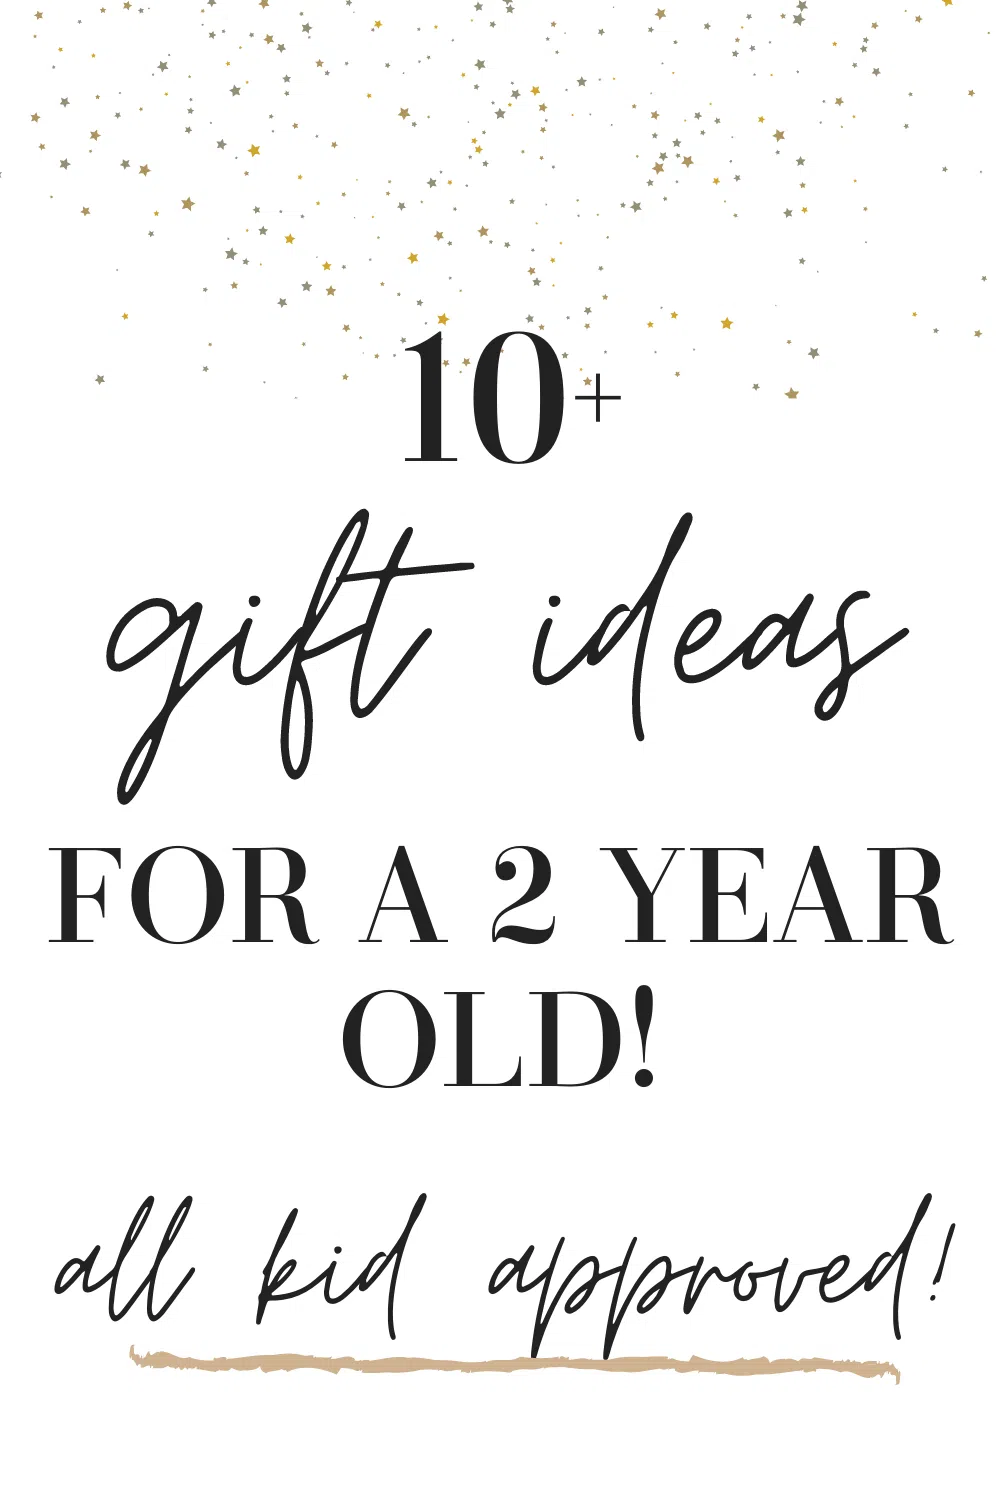 2 year old gift ideas